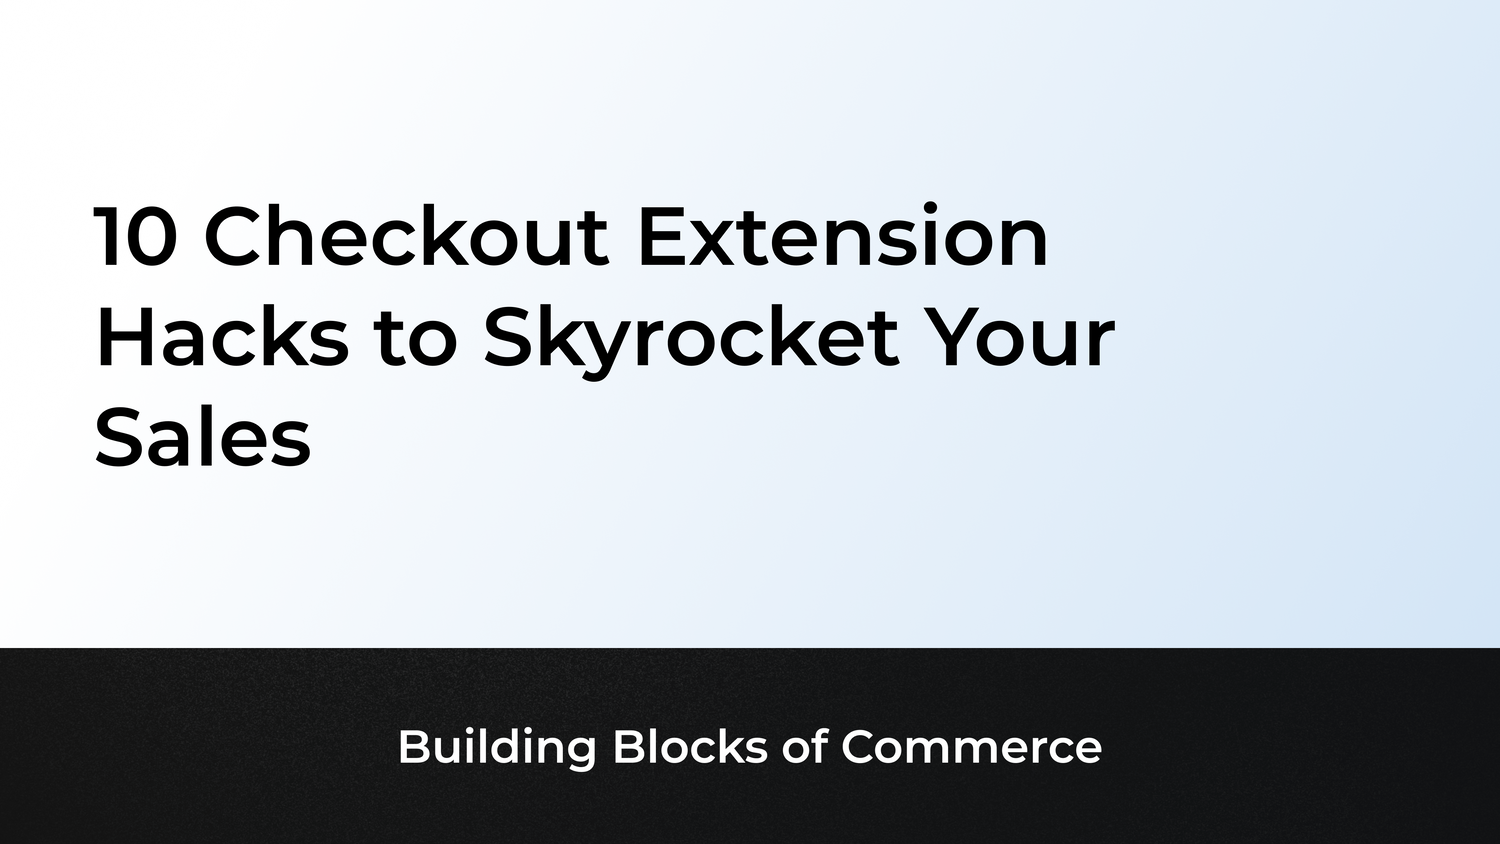 10 Checkout Extension Hacks to Skyrocket Your Sales